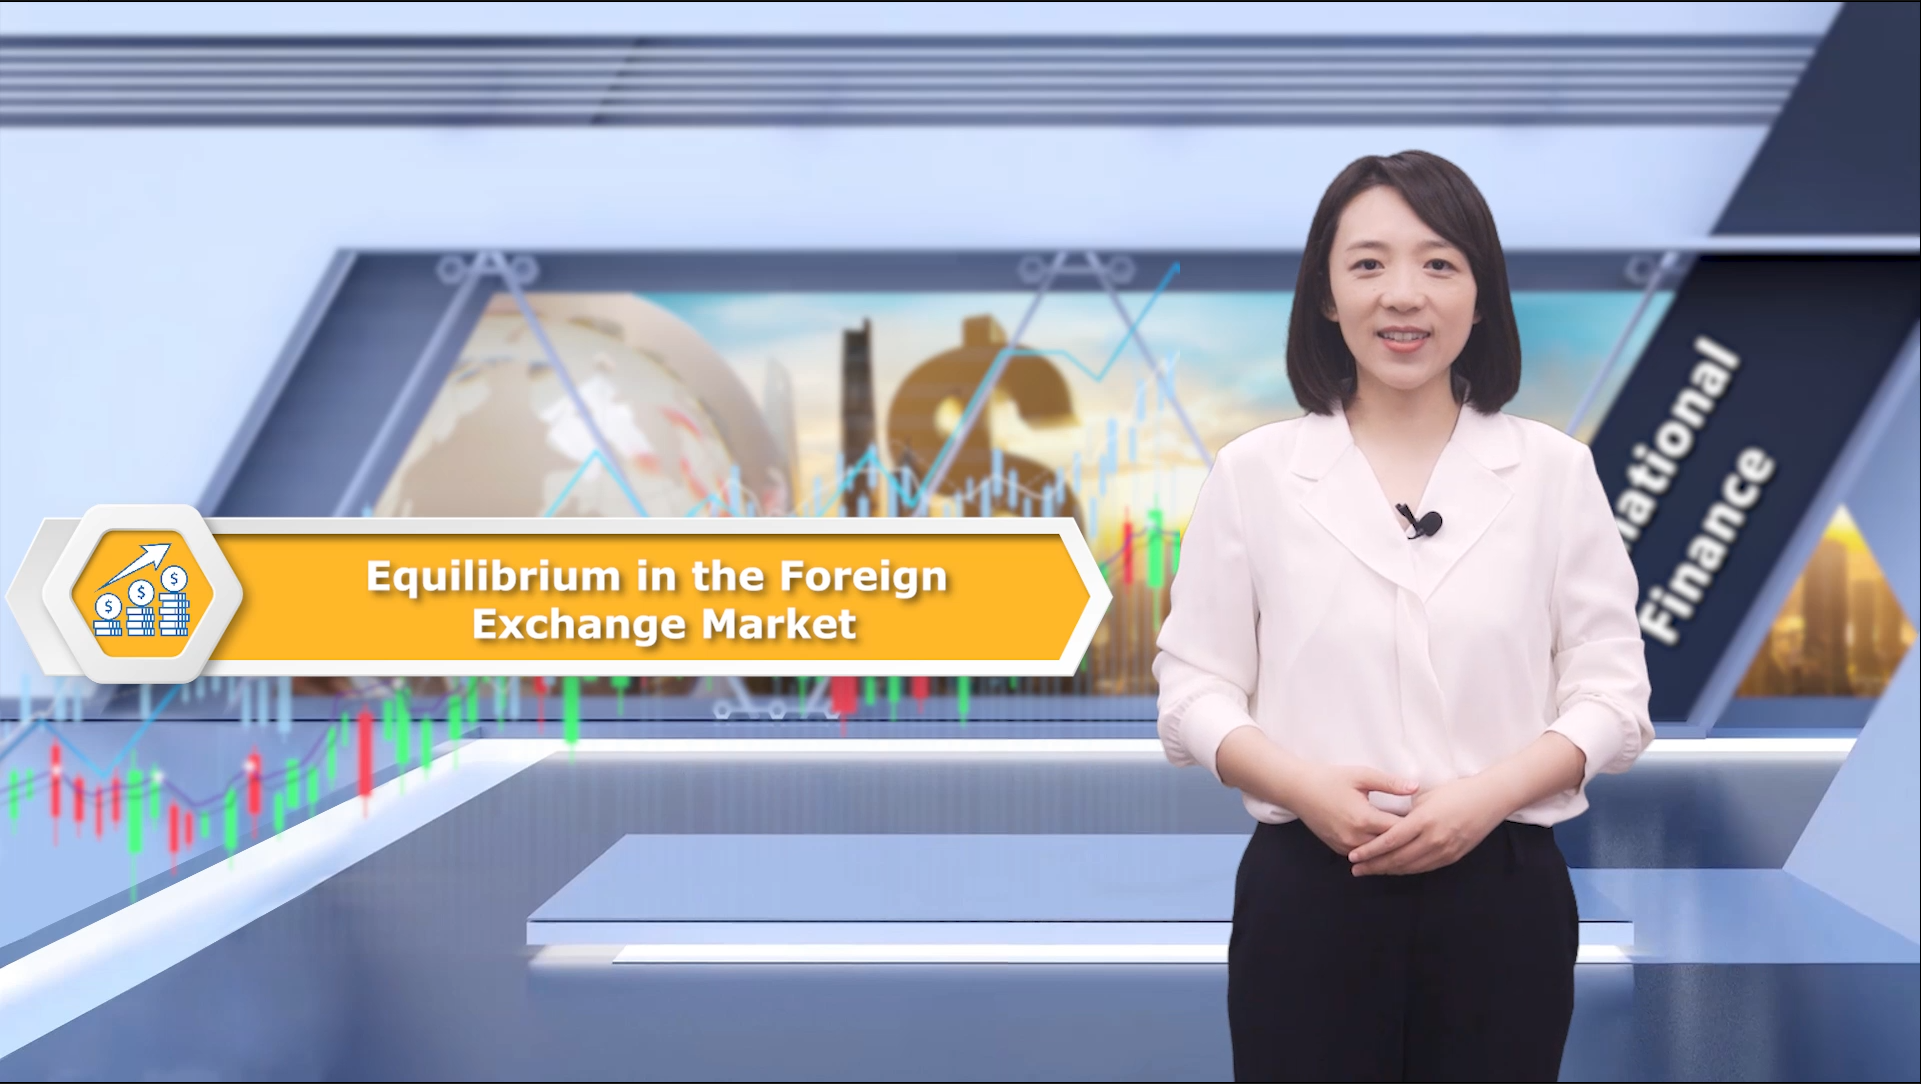 2.3 Equilibrium in the Foreign Exchage Market